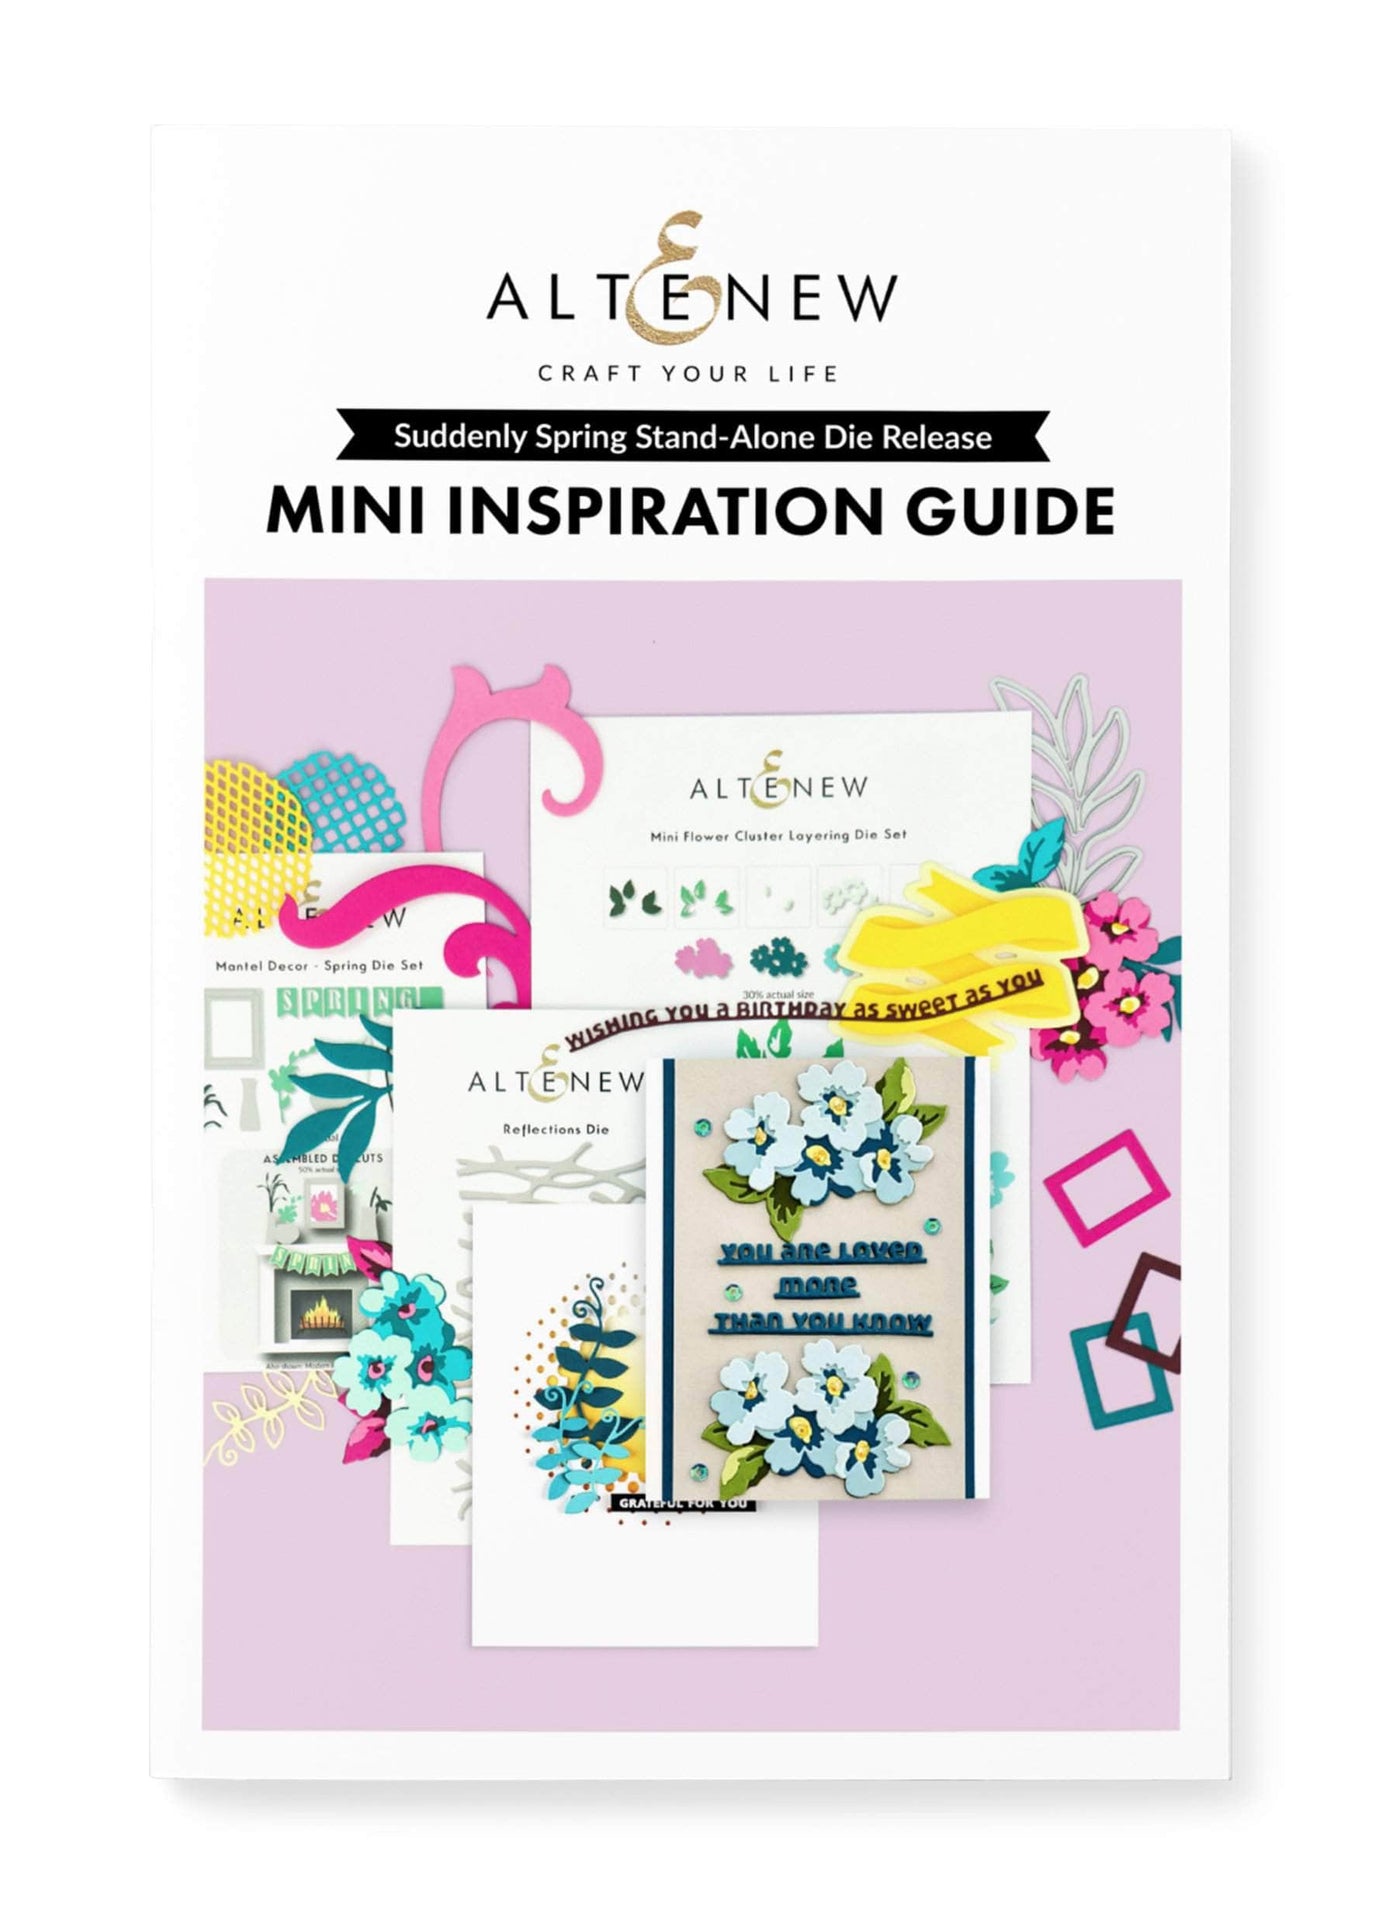 55Printing.com Printed Media Suddenly Spring Stand-alone Die Release Mini Inspiration Guide